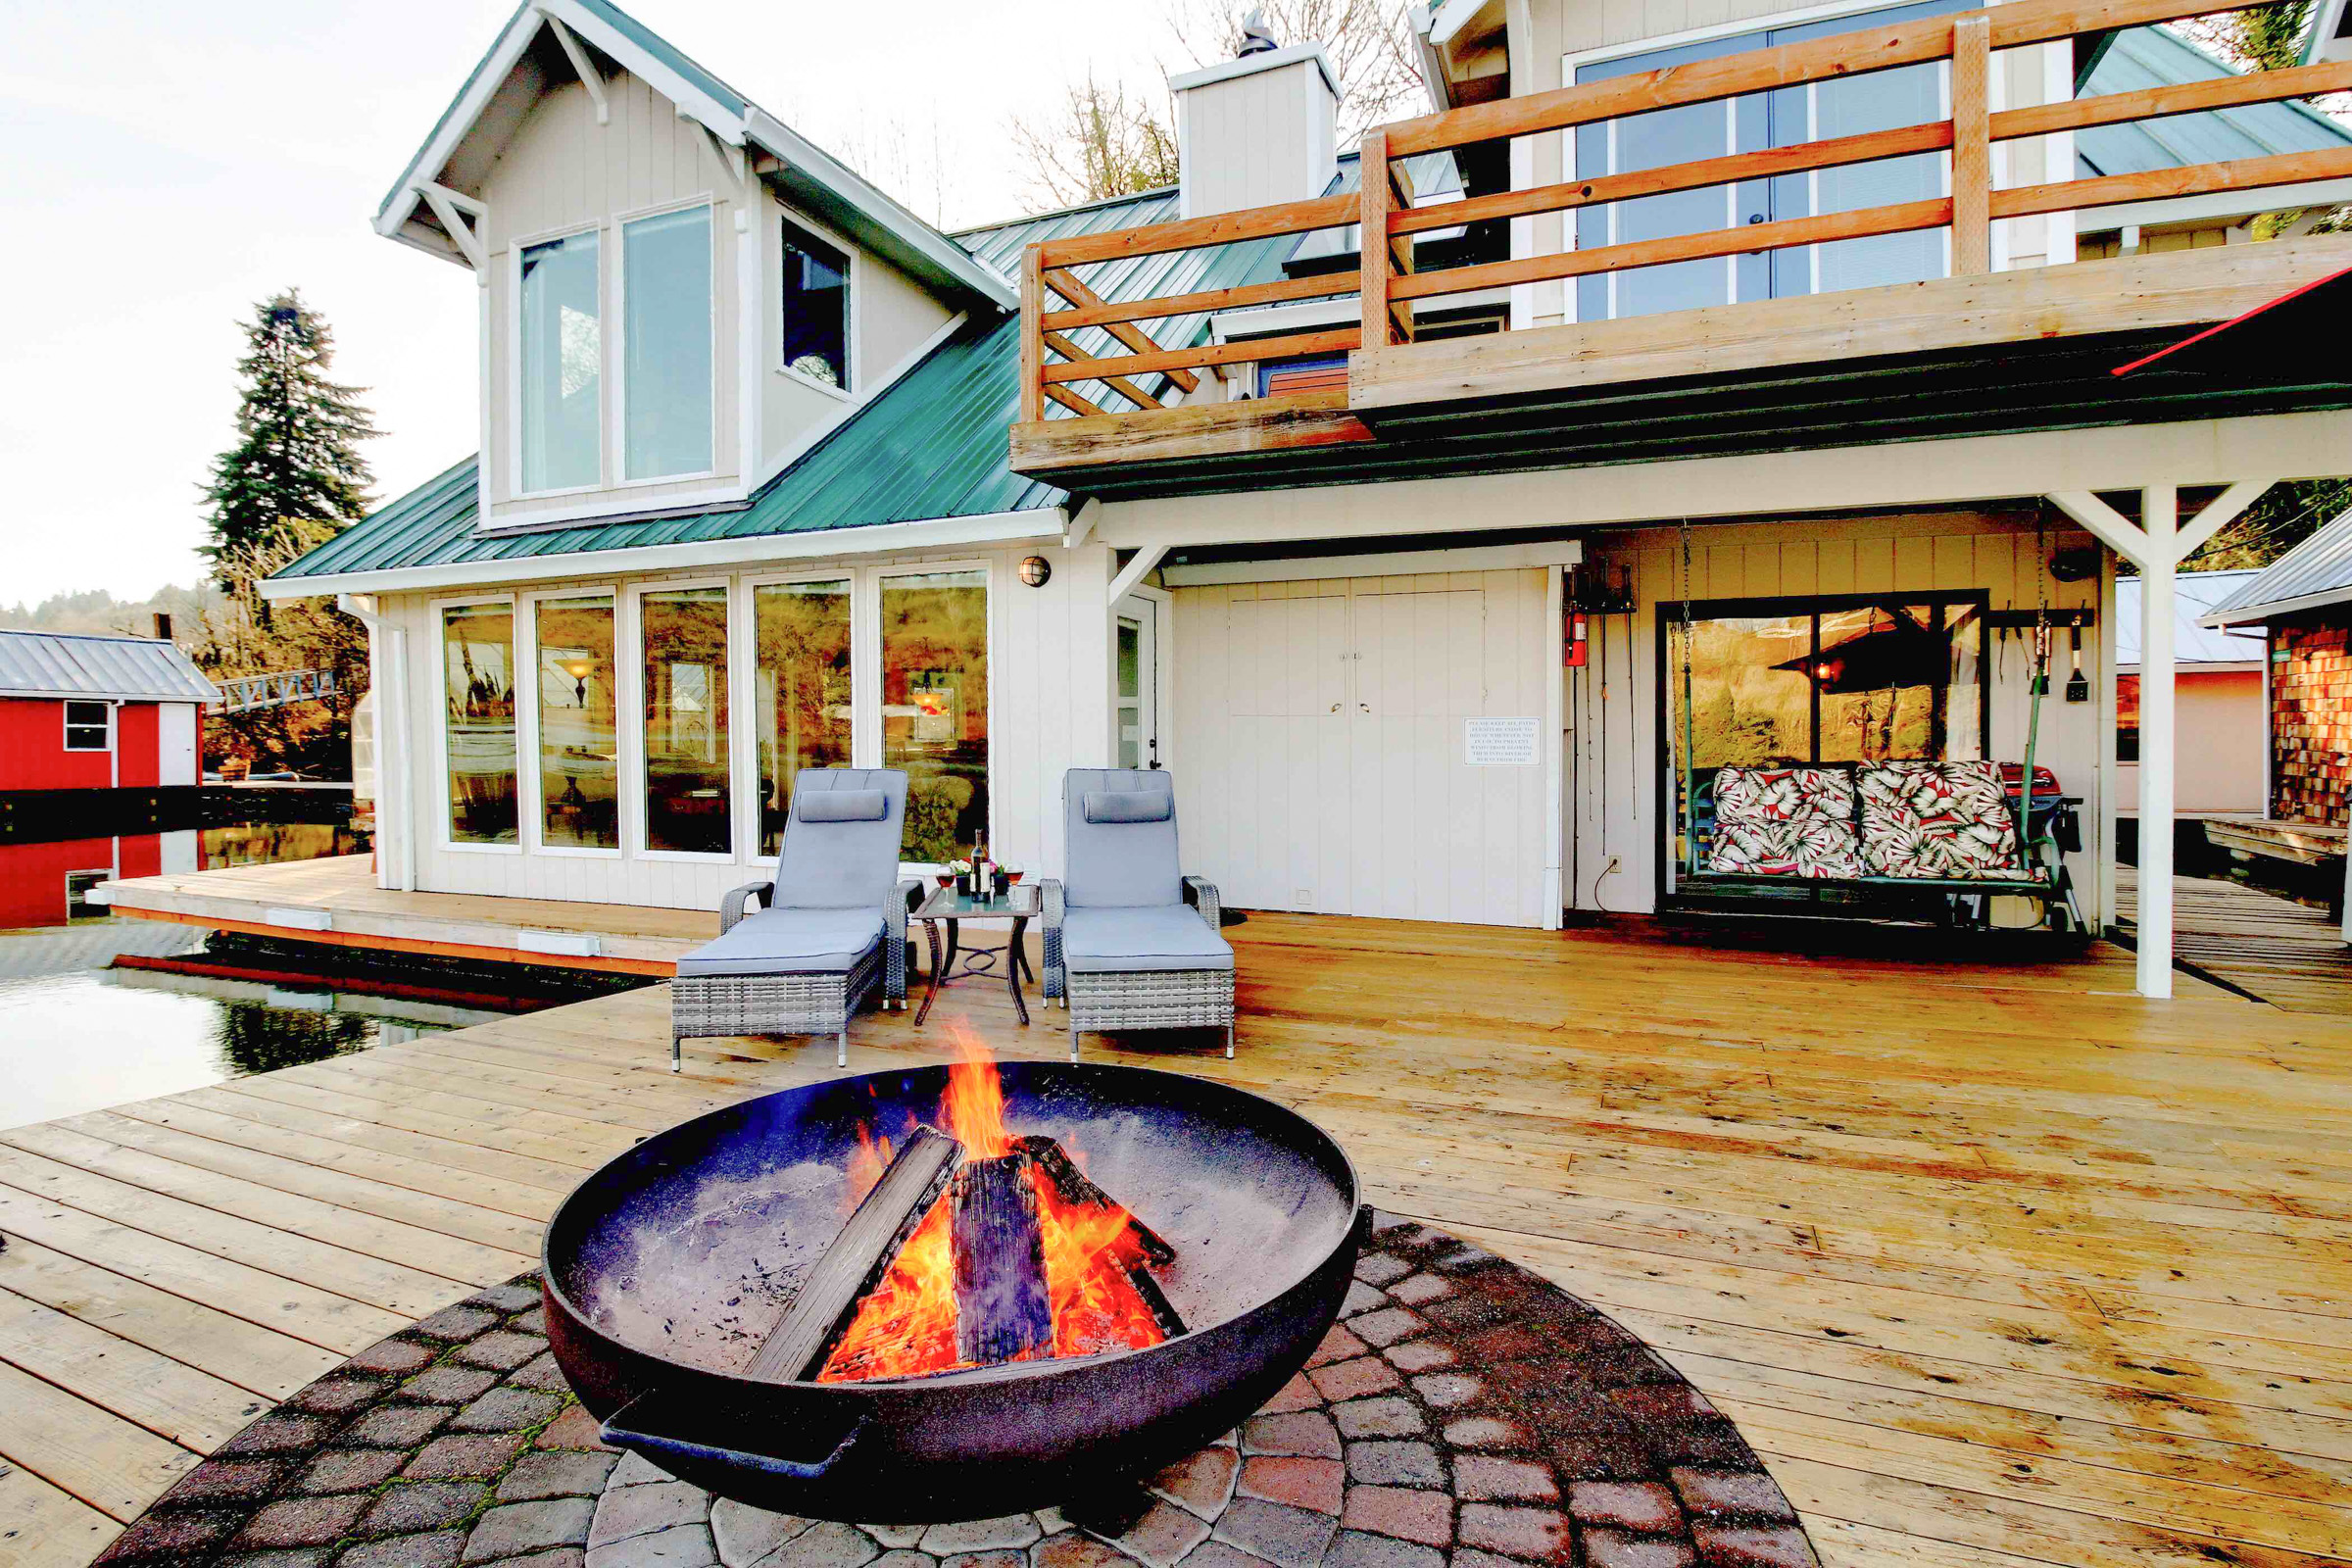 Floating white house with an extended dock and patio crossover with a fire pit in the foreground.